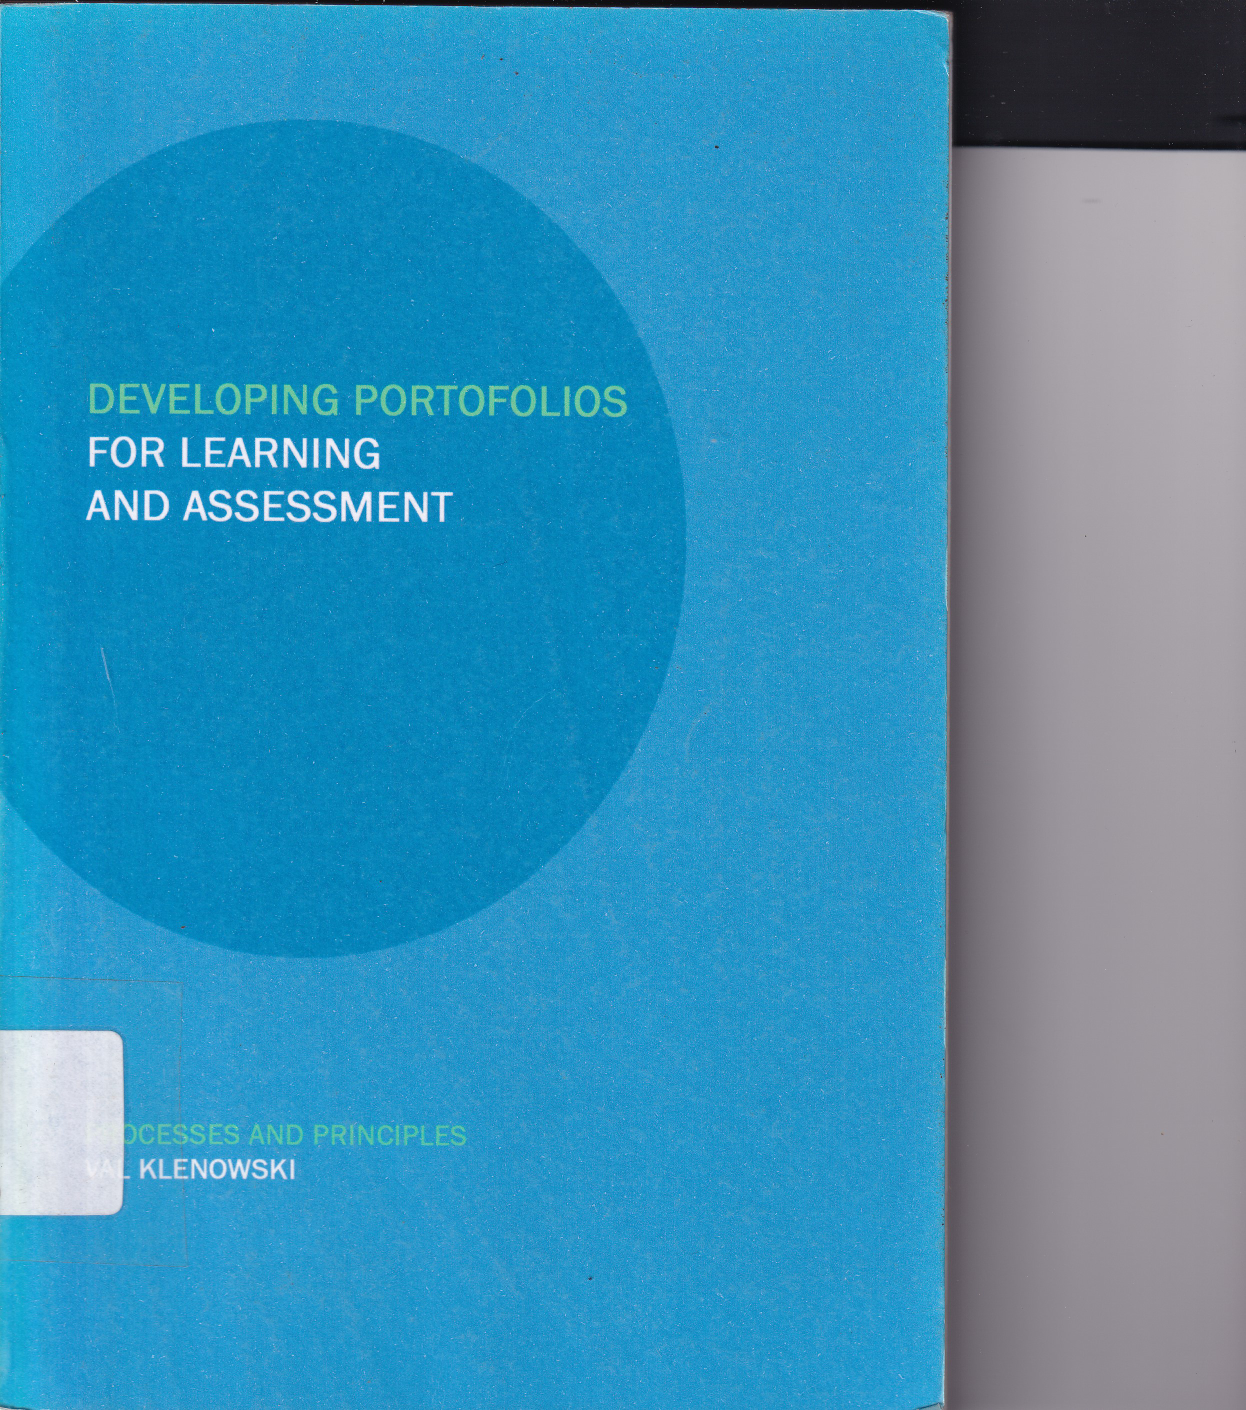 Developing Portofolio For Learning and Assesment